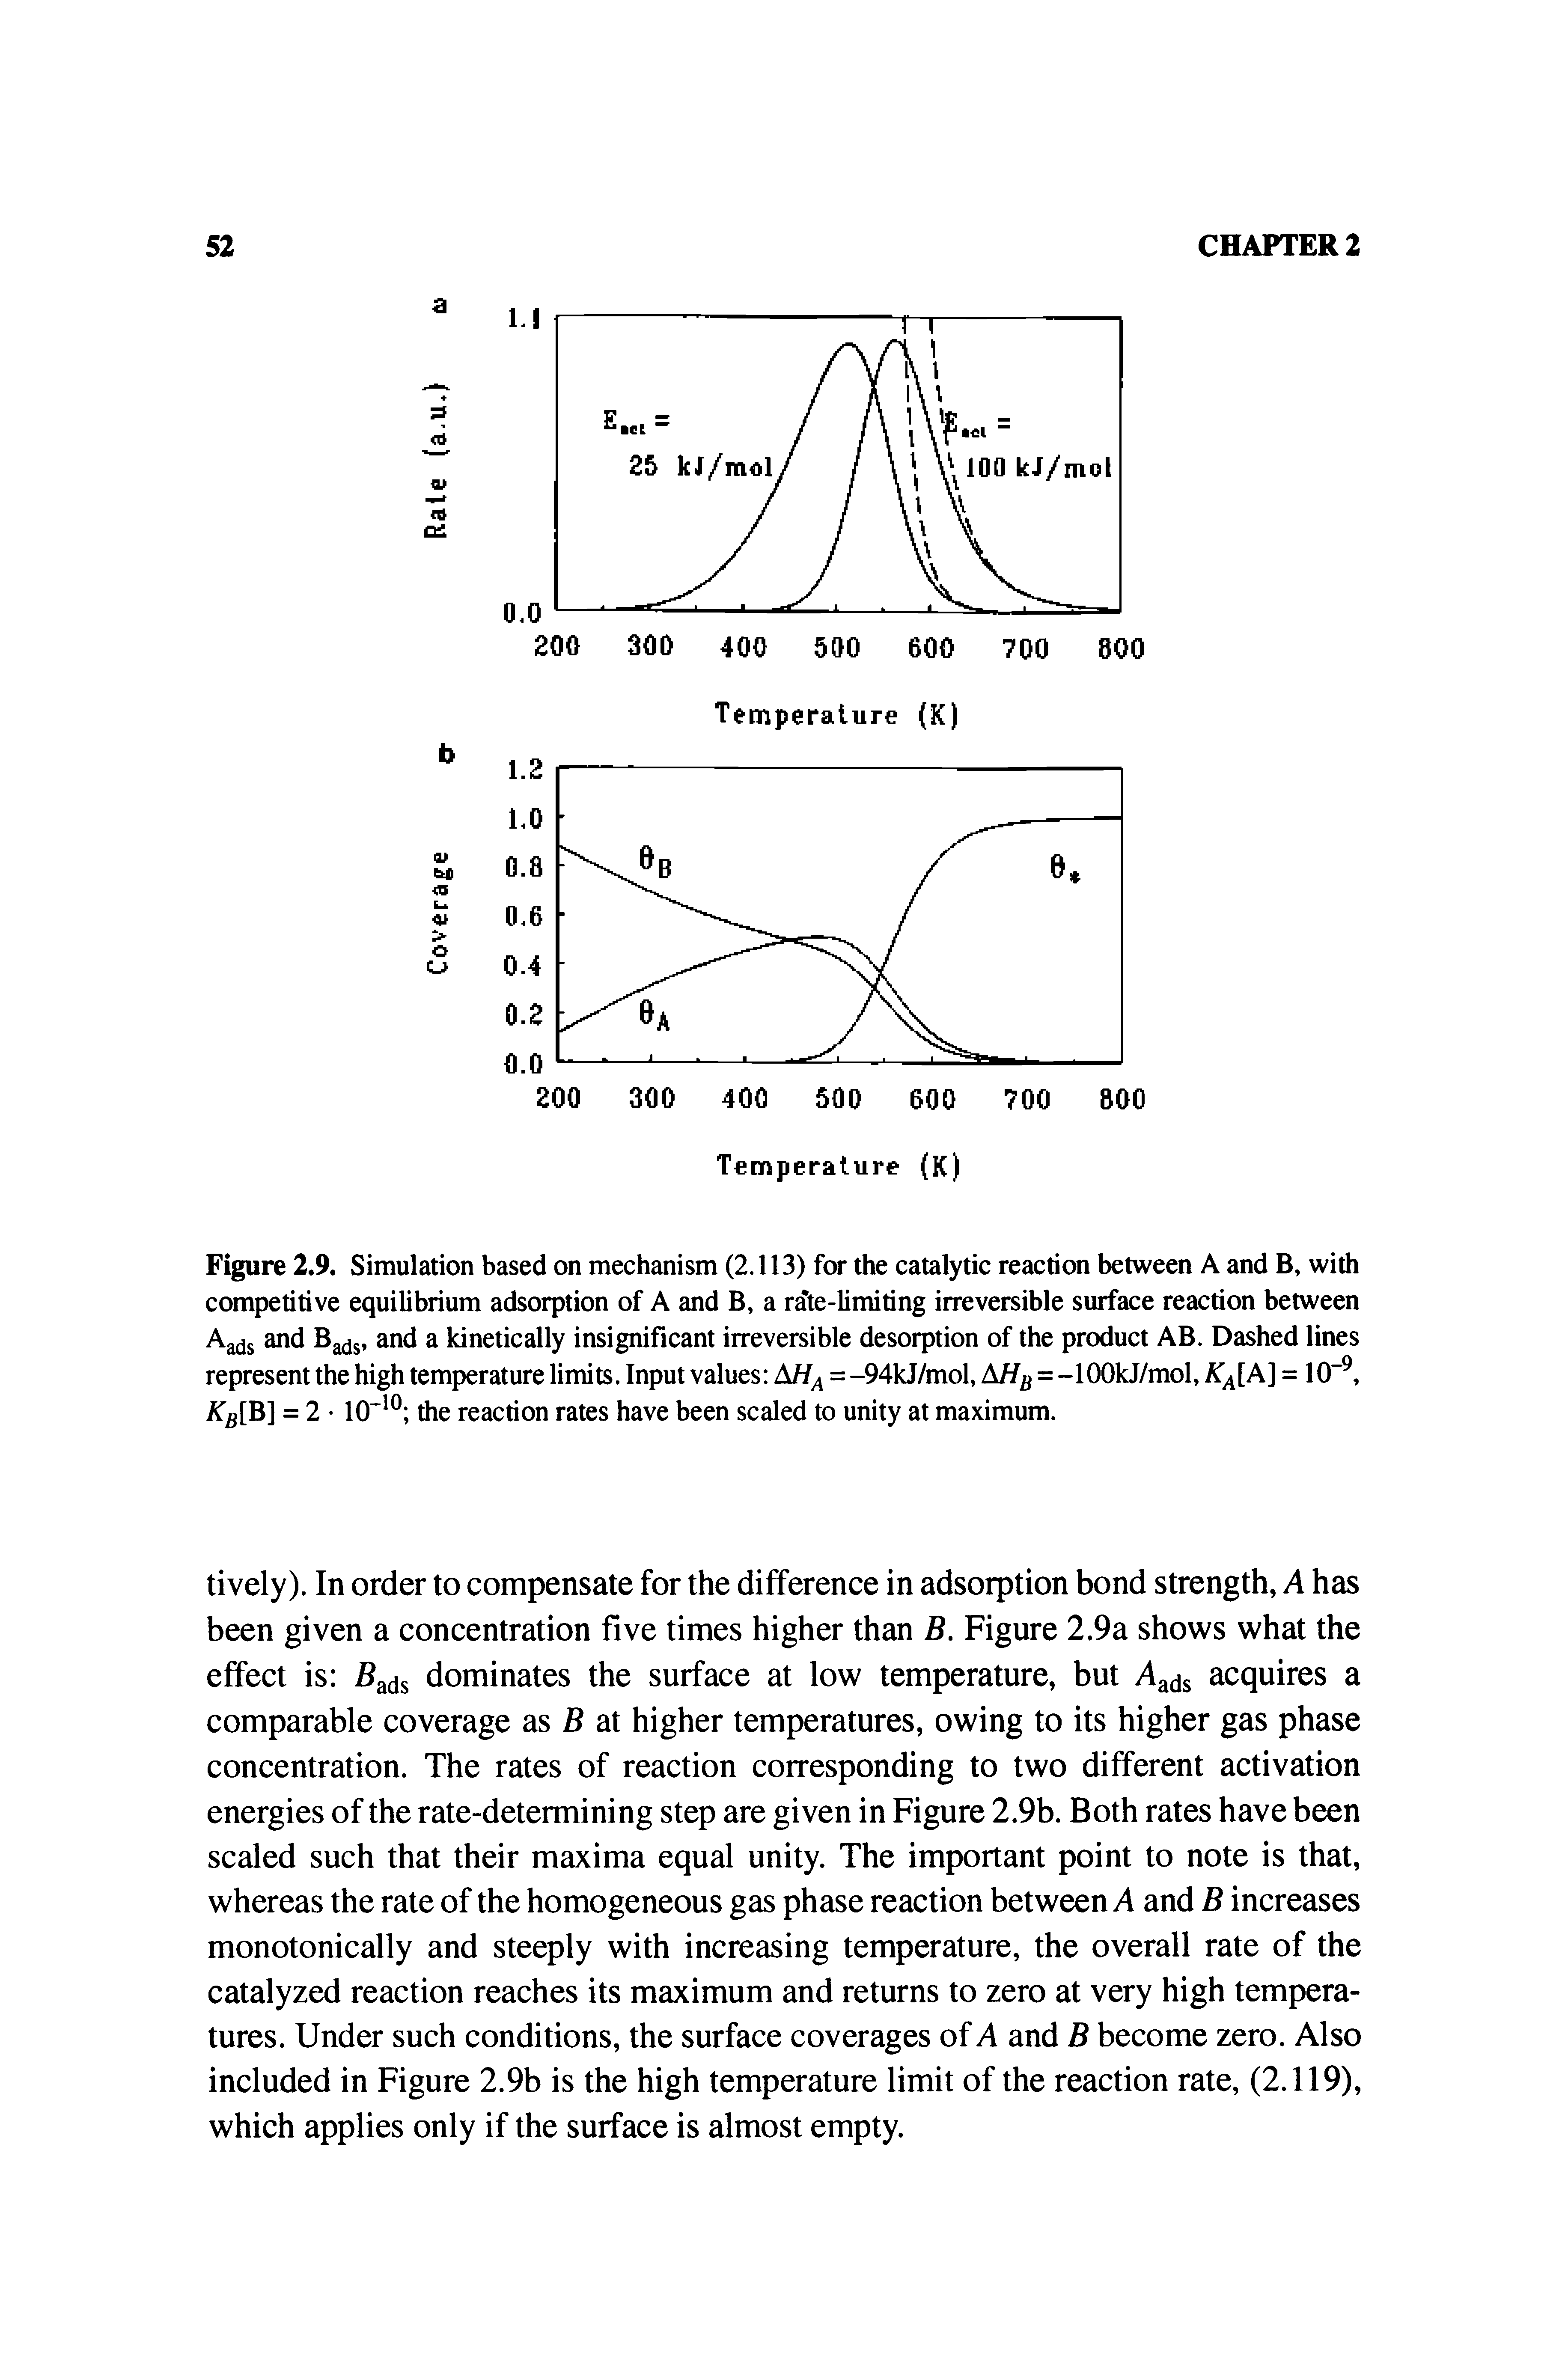 Figure 2.9. Simulation based on mechanism (2.113) for the catalytic reaction between A and B. with competitive equilibrium adsorption of A and B, a rate-limiting irreversible surface reaction between Aads and B ds and a kinetically insignificant irreversible desorption of the product AB. Dashed lines represent the high temperature limits. Input values A// =-94kJ/mol, A// = -lOOkJ/mol, /r [A] = 10" = 2 10 the reaction rates have been scaled to unity at maximum.